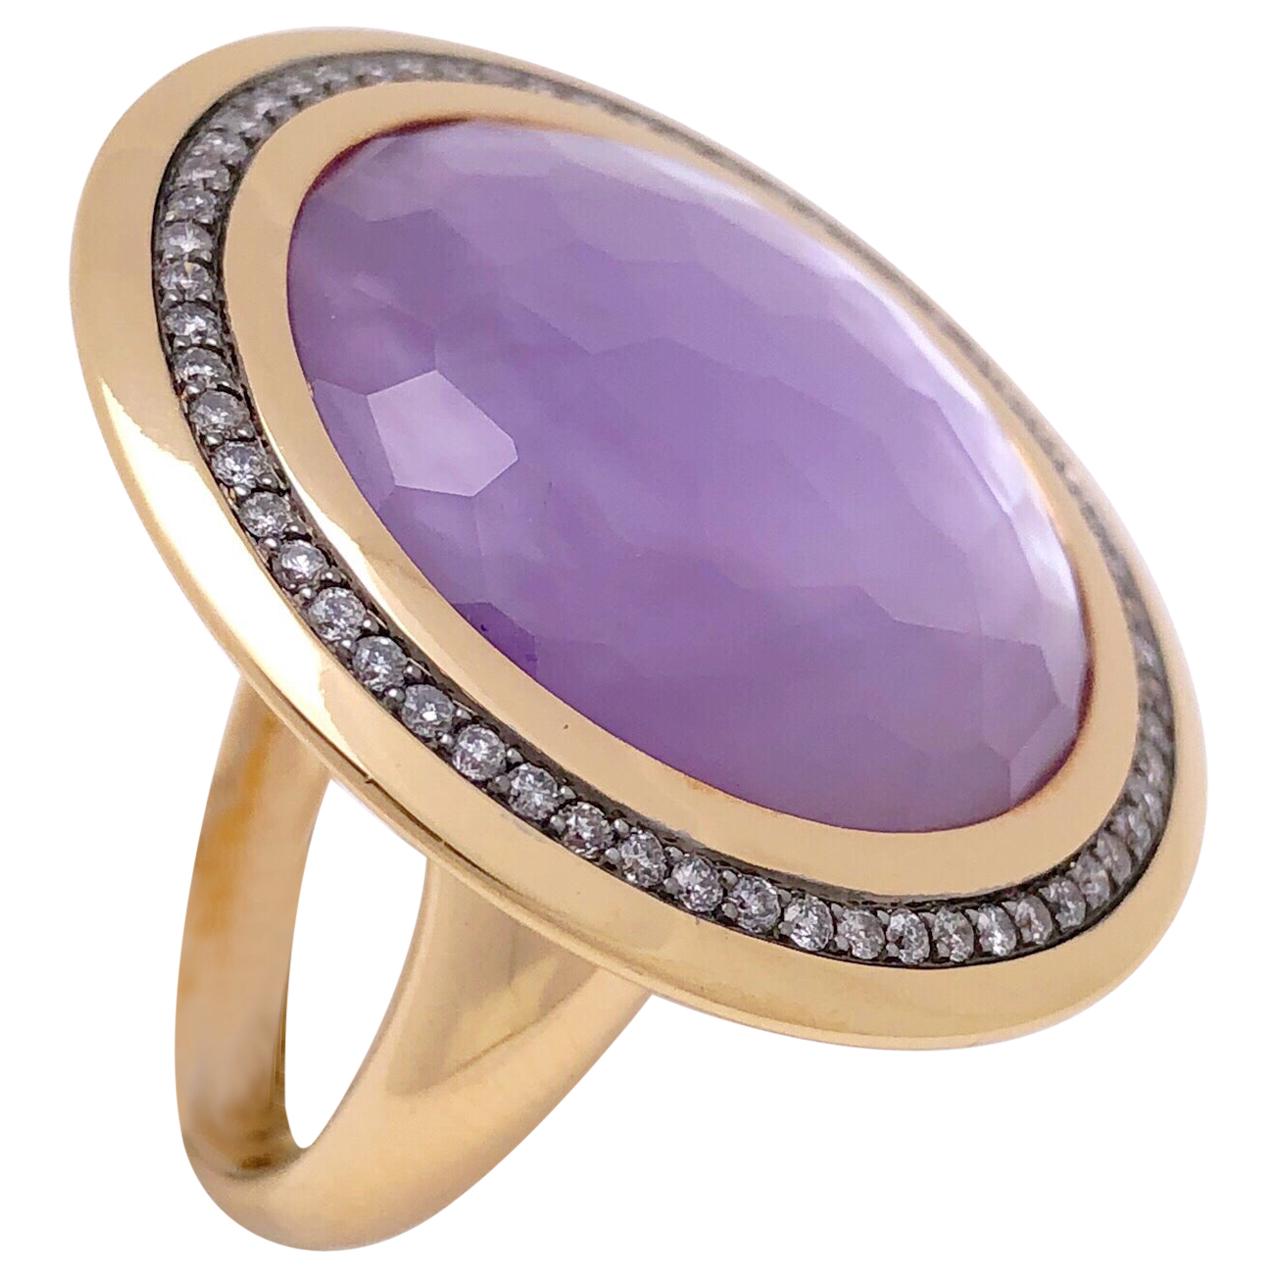 18KT Rose Gold, 14.35Ct. Amethyst & 8.07Ct Mother of Pearl Ring with Diamonds